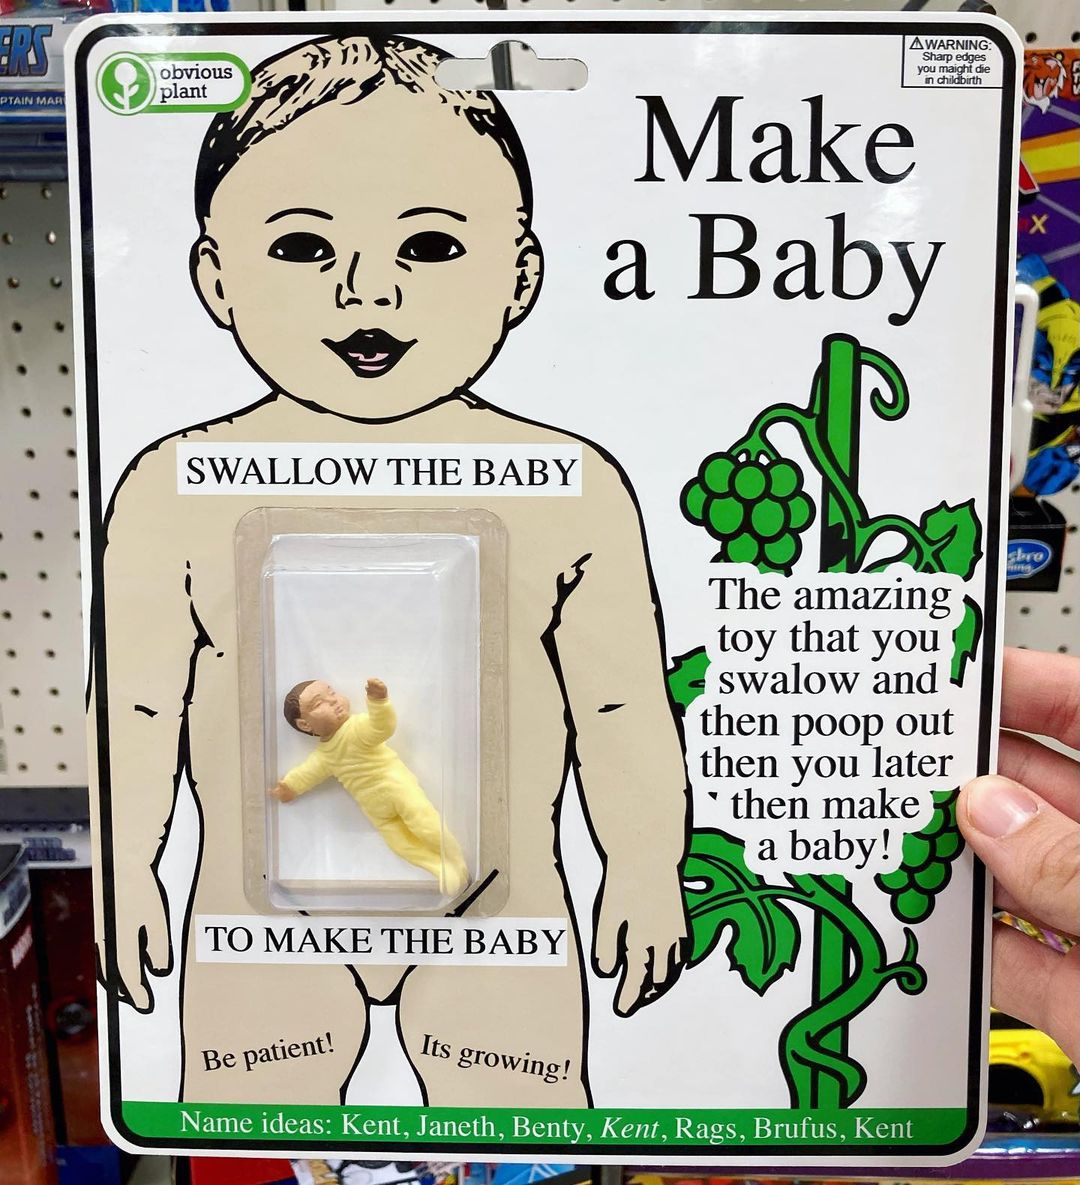 How to Make a Baby